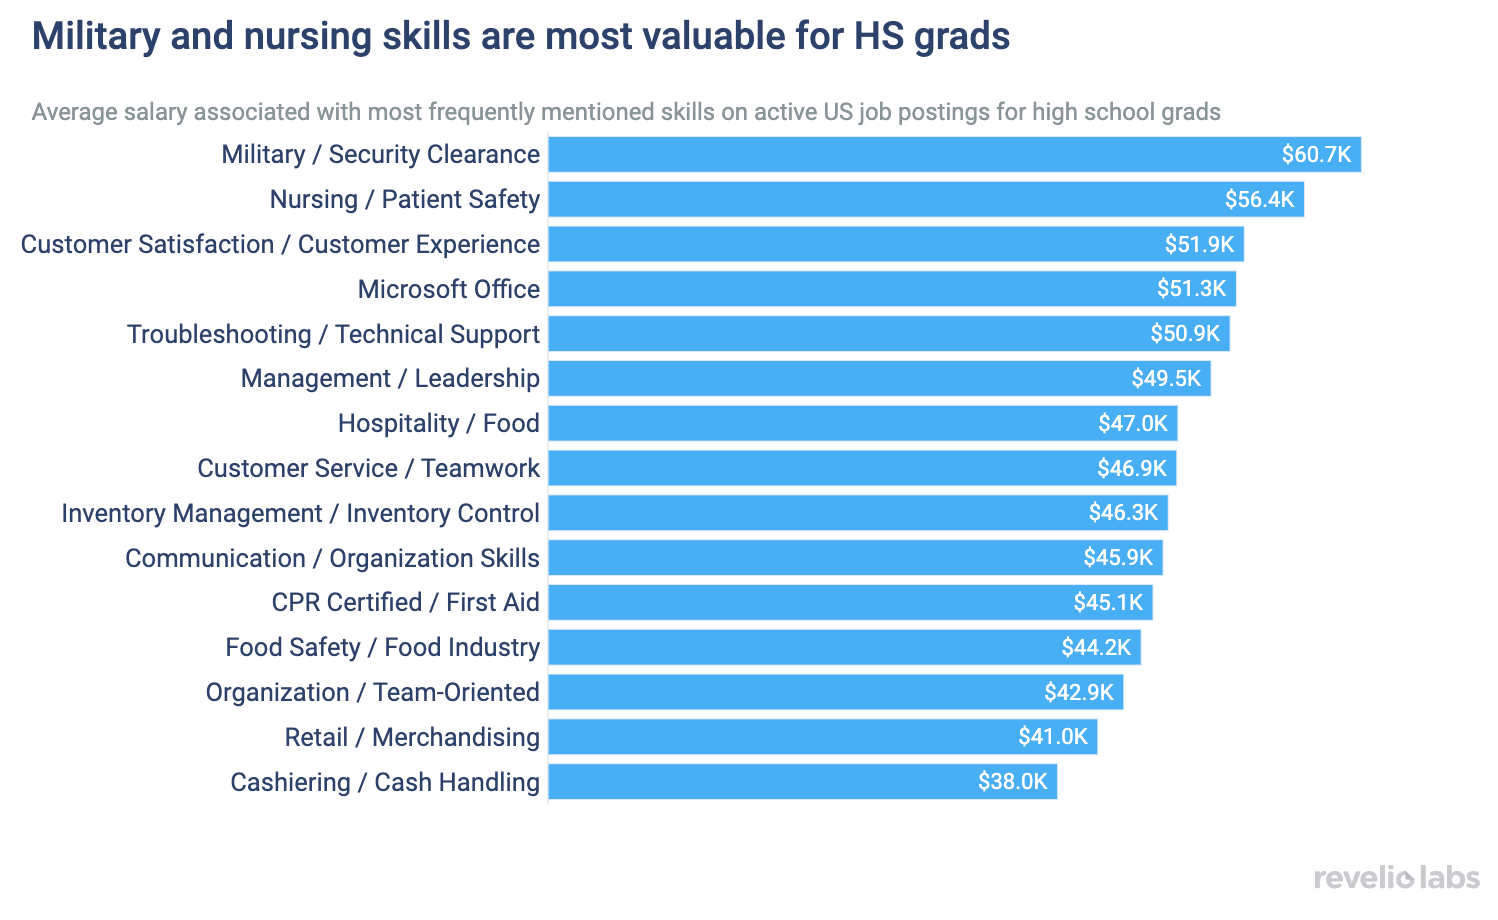 Military and nursing skills are most valuable for HS grads